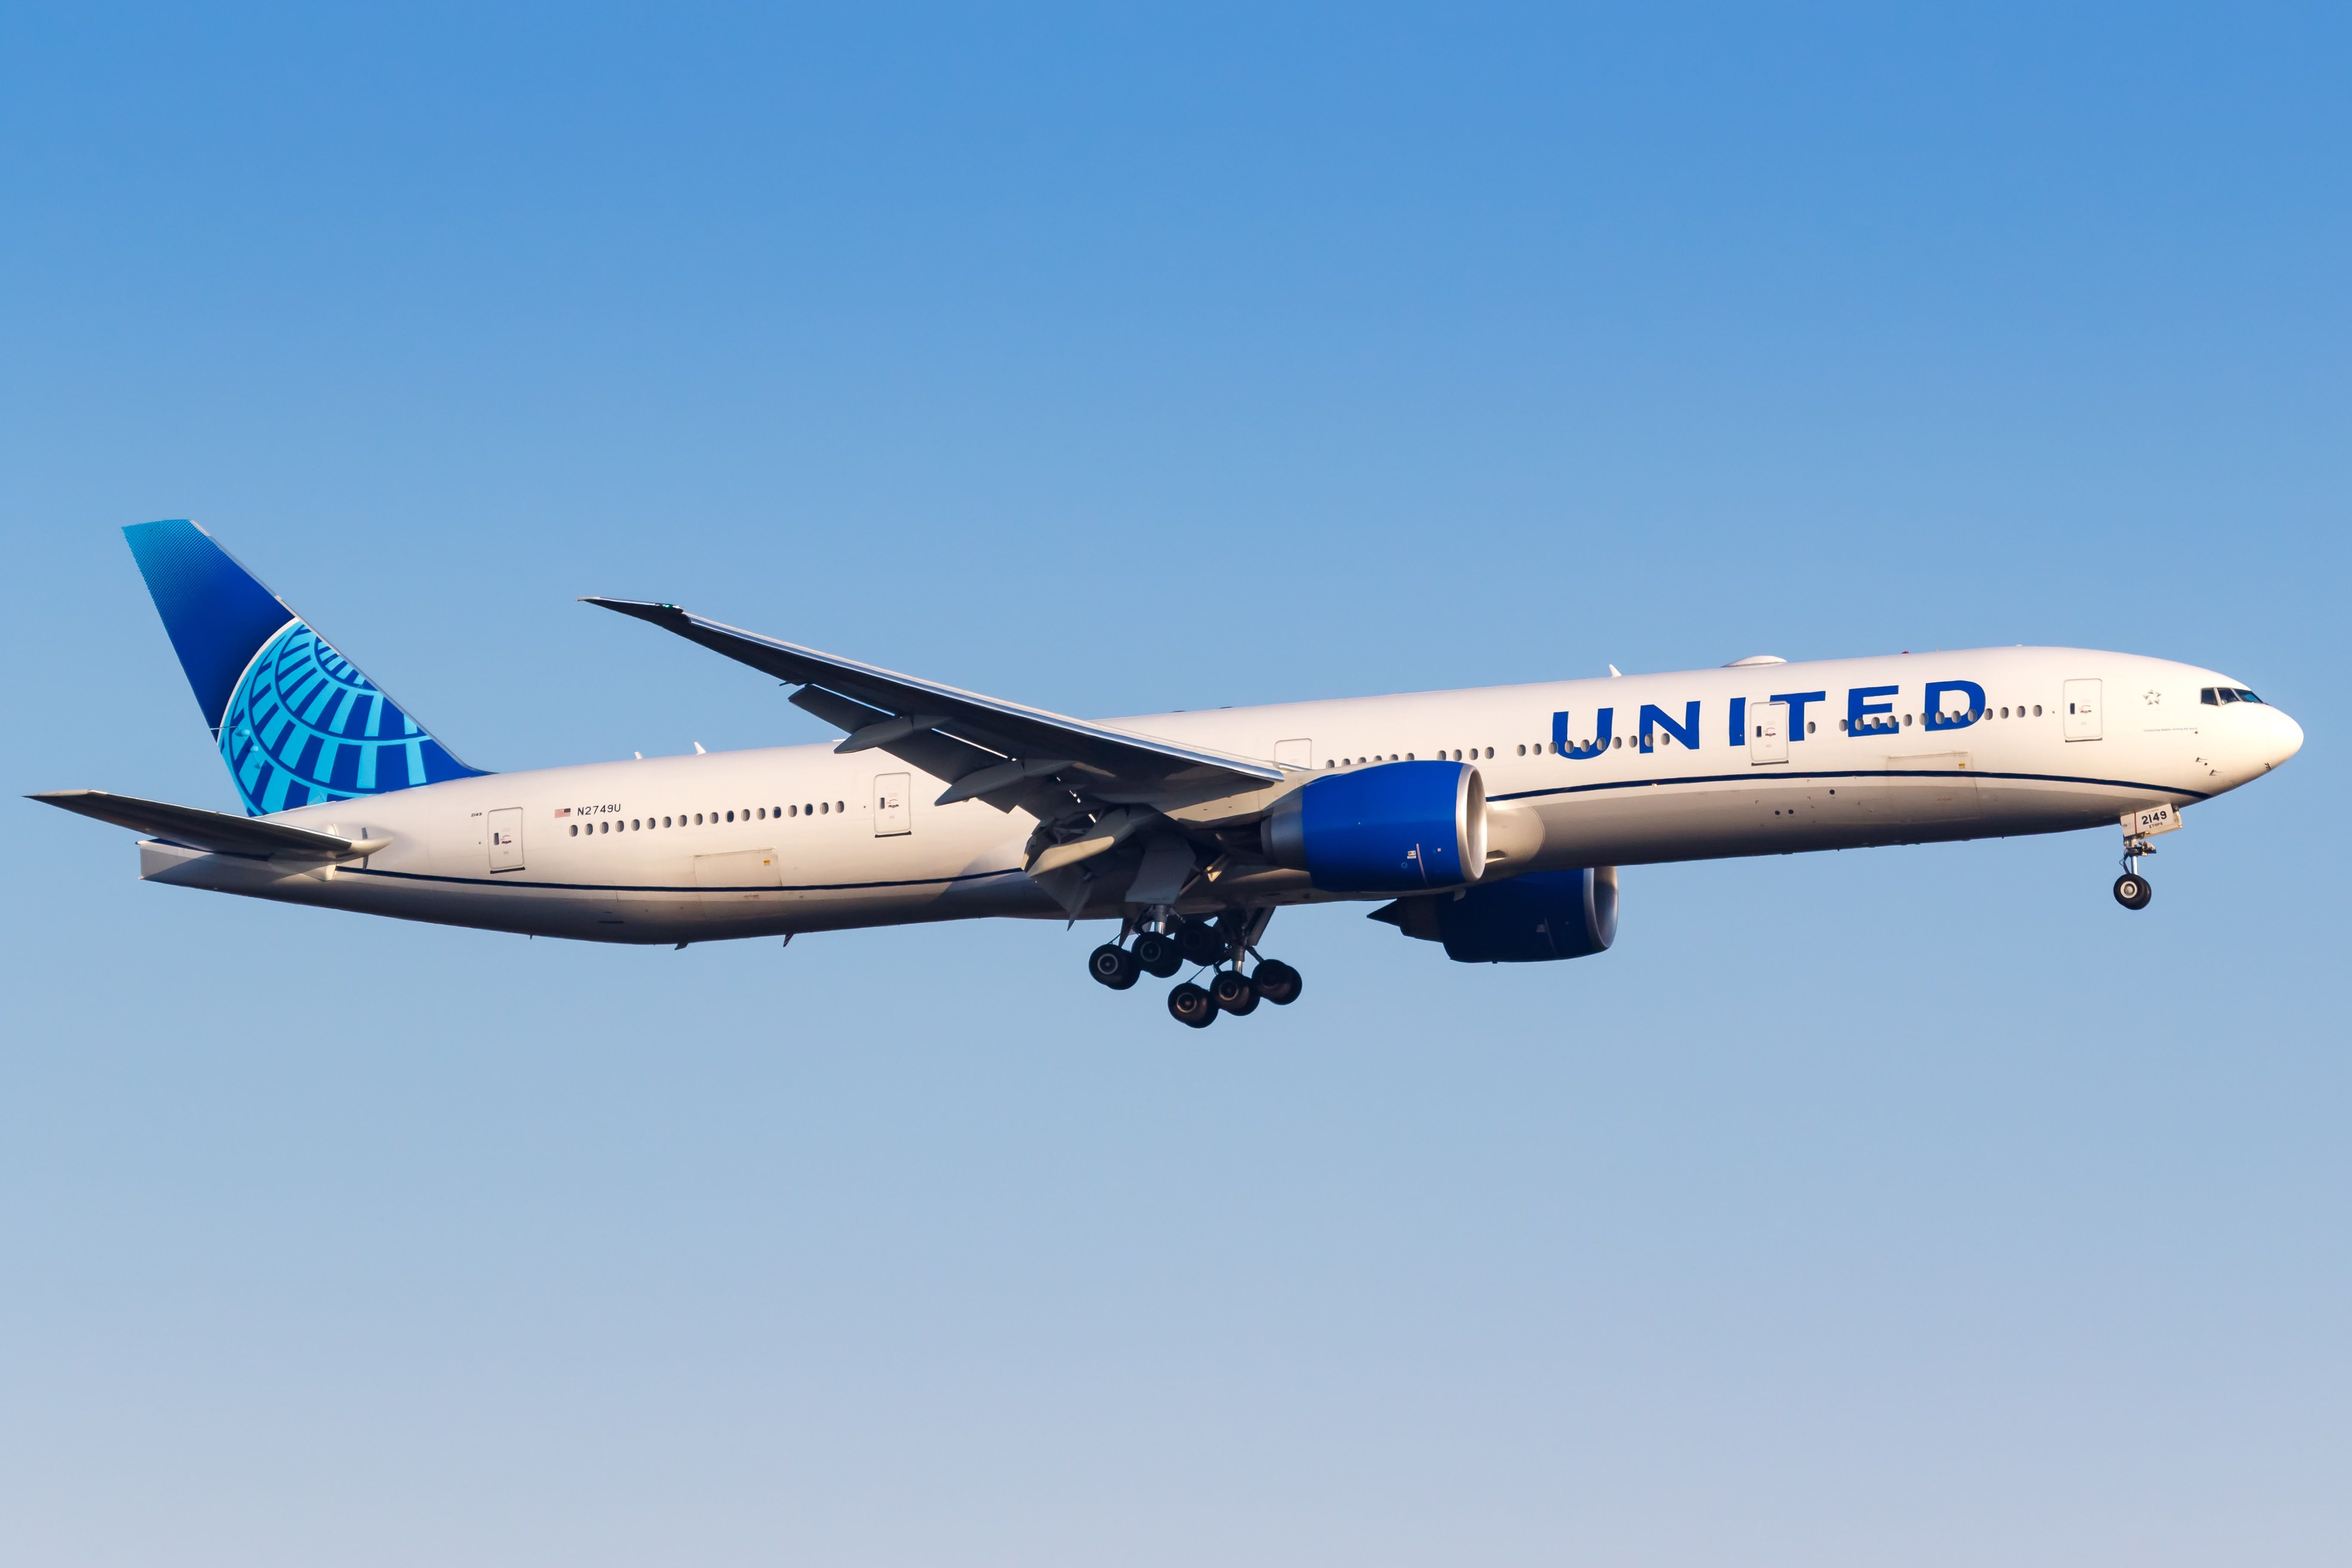 A United Airlines Boeing 777-300ER Flying in the sky.